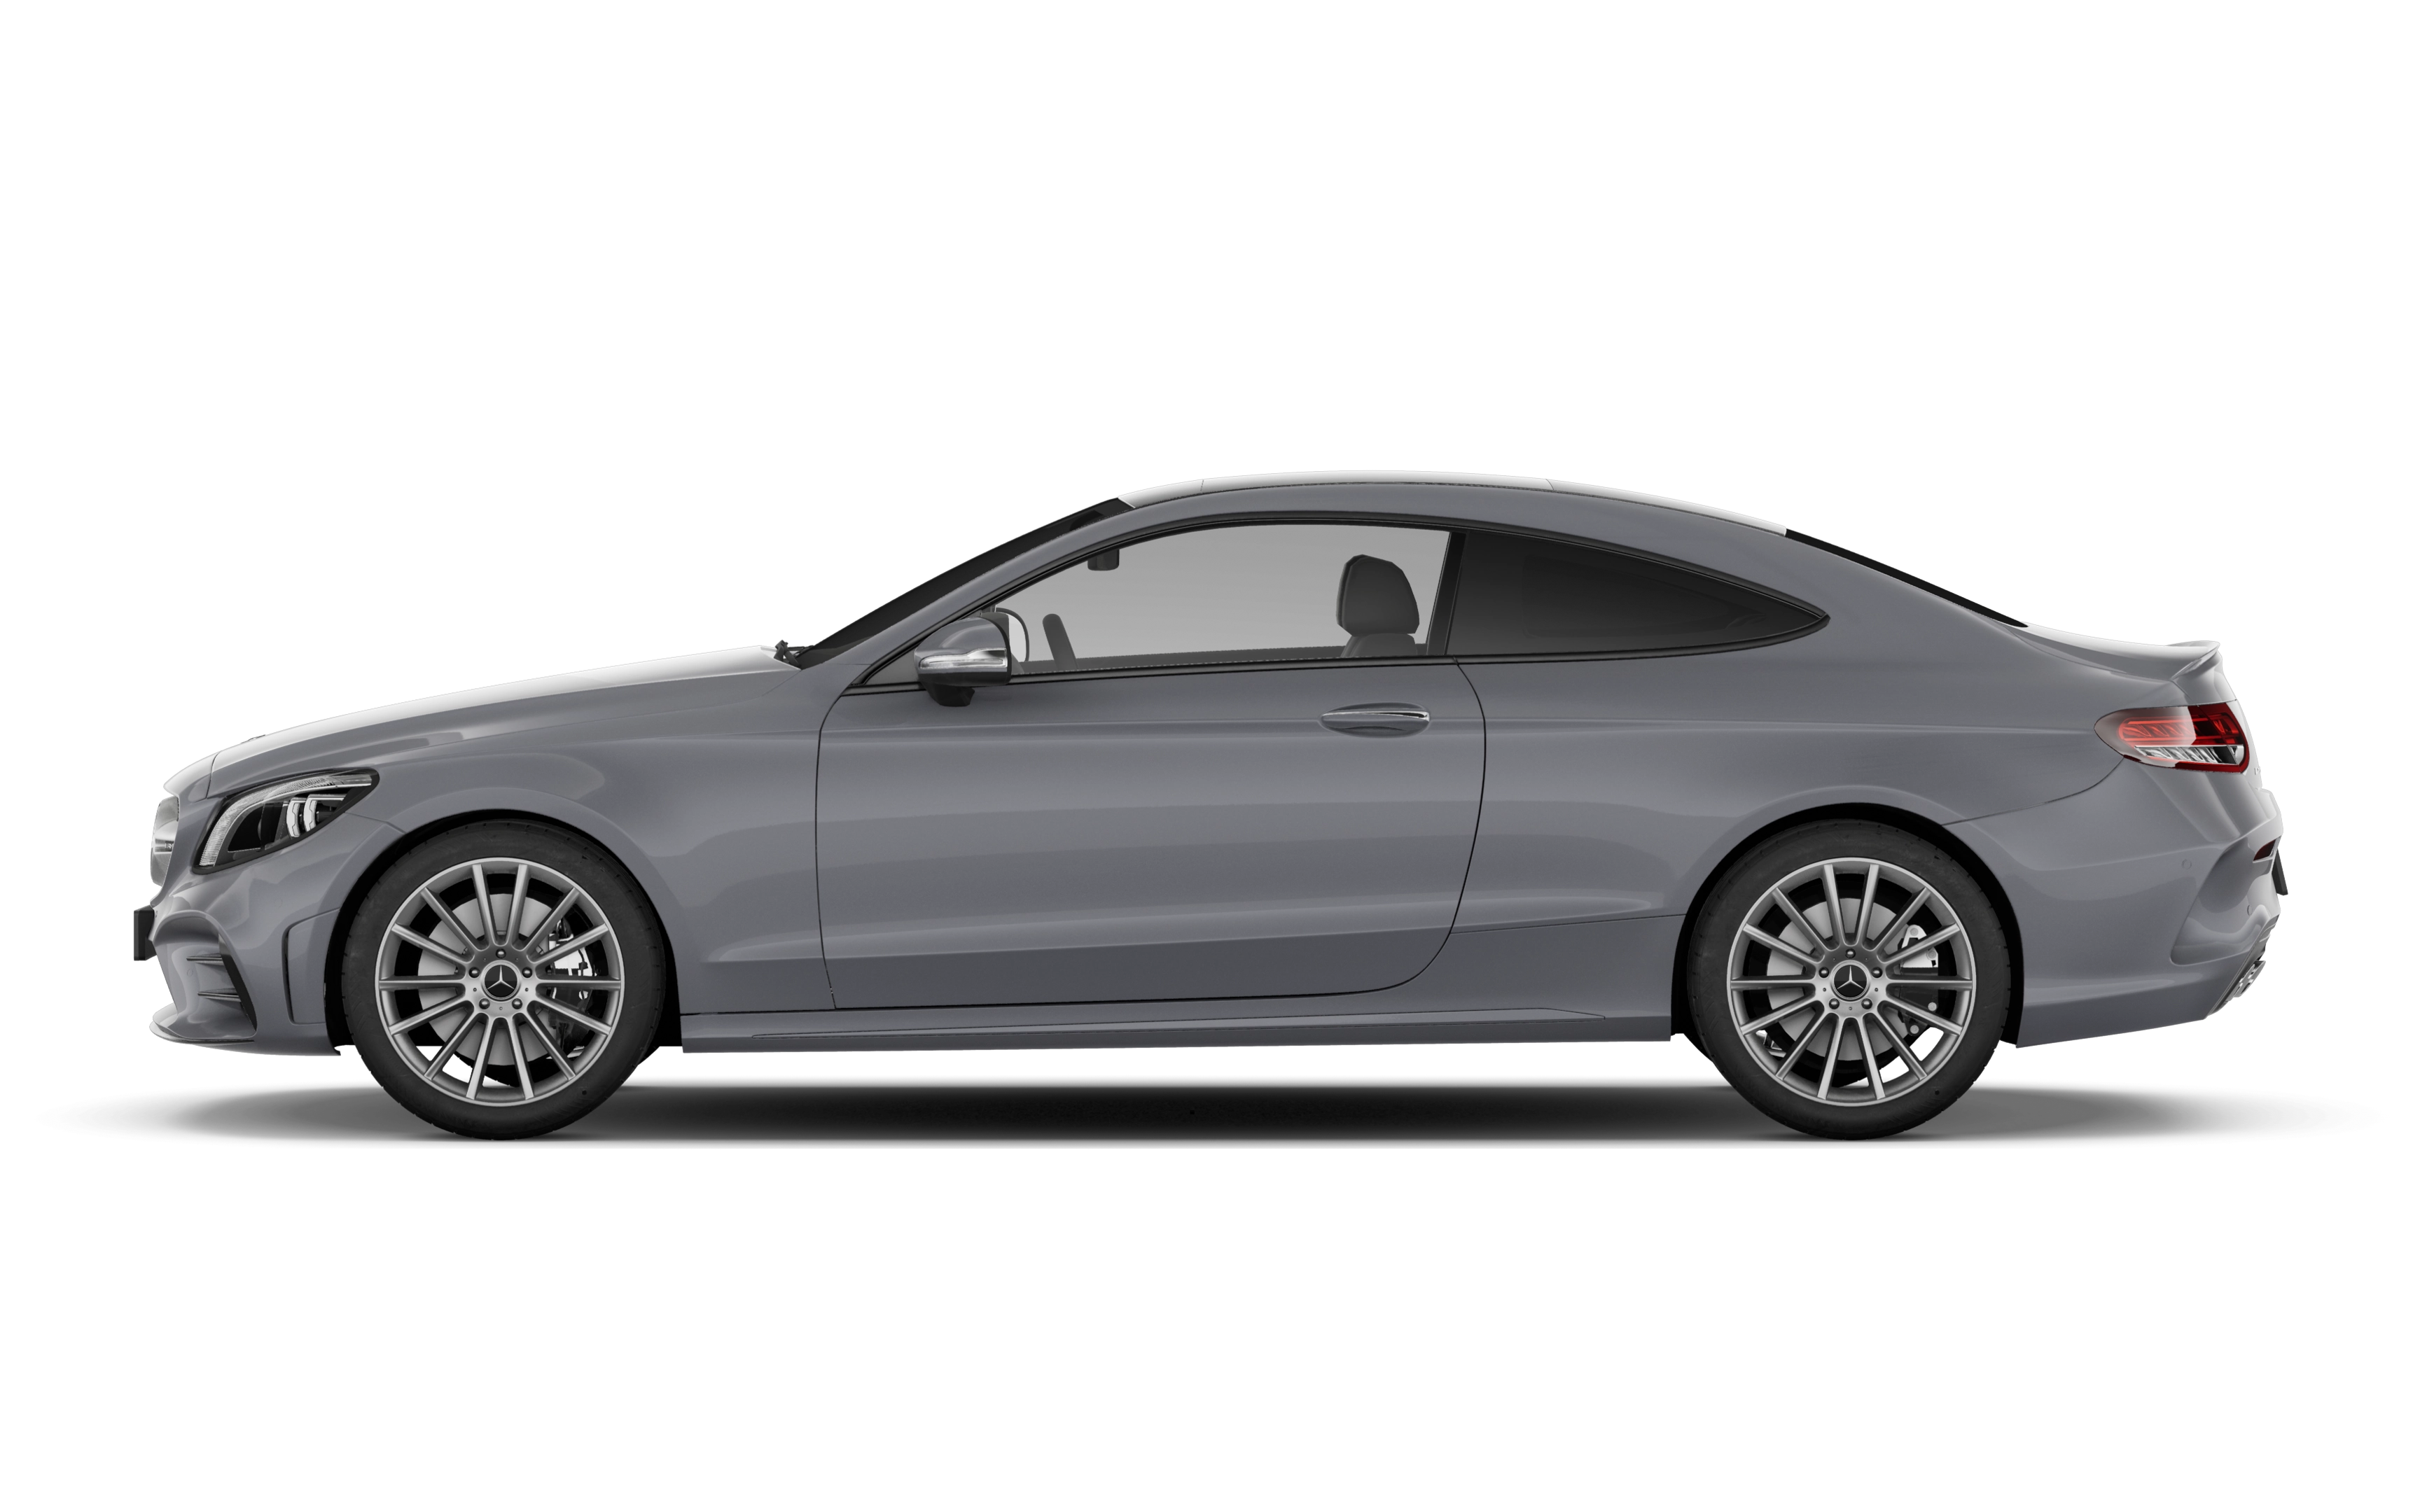 Mercedes-benz c class amg coupe c63 s final edition 2 doors mct